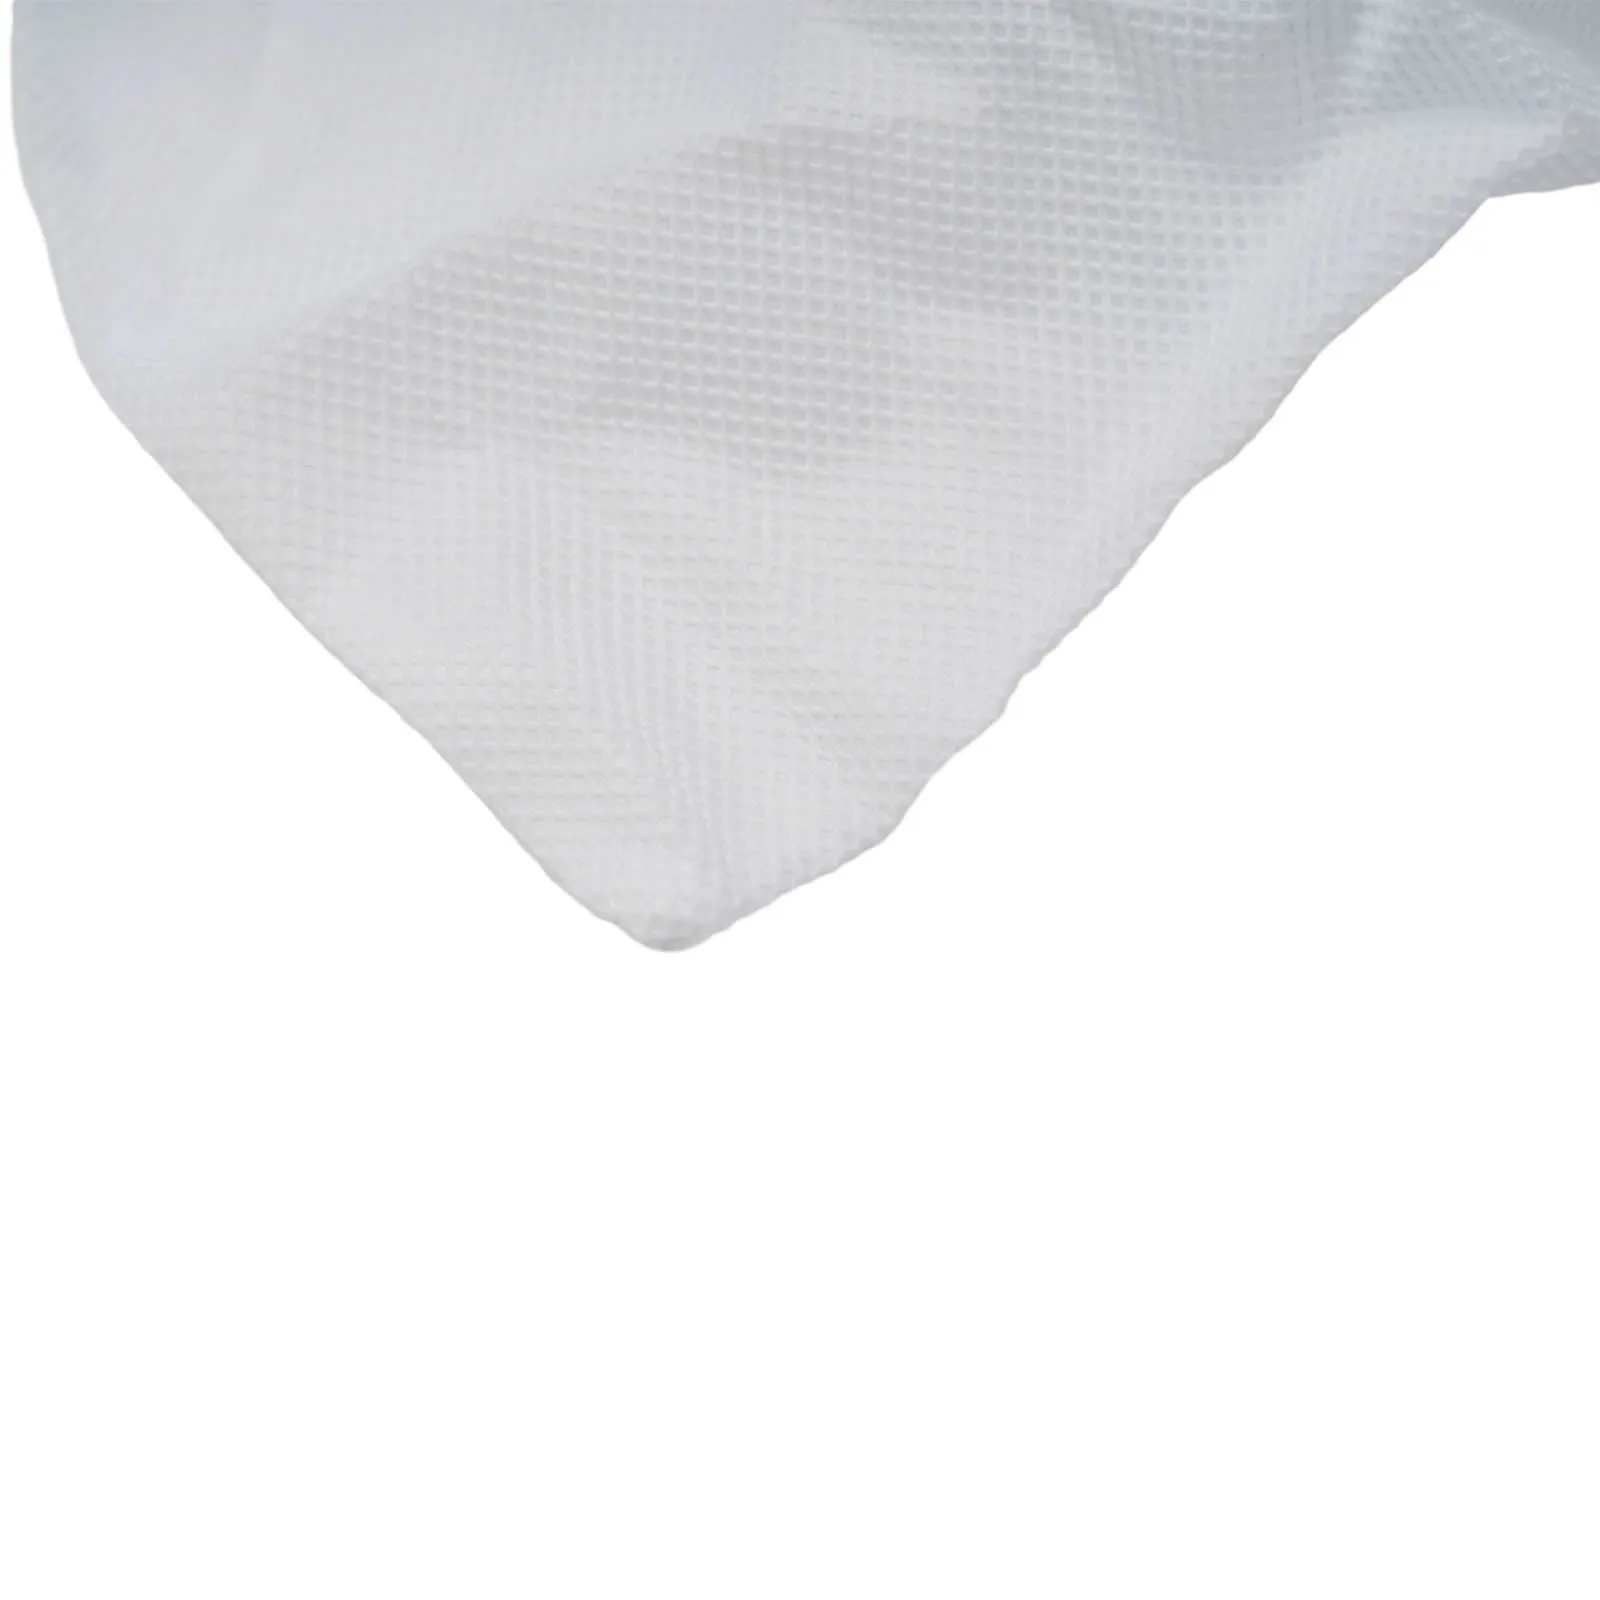 More Durable Practical Washable Brand New Washable Dust Bag Dust Bags 166084-9 For Makita CL100/106/180 DCL180 pre filter filter filter parts for cl100 106 180 dcl180 for makita reusable 443060 3